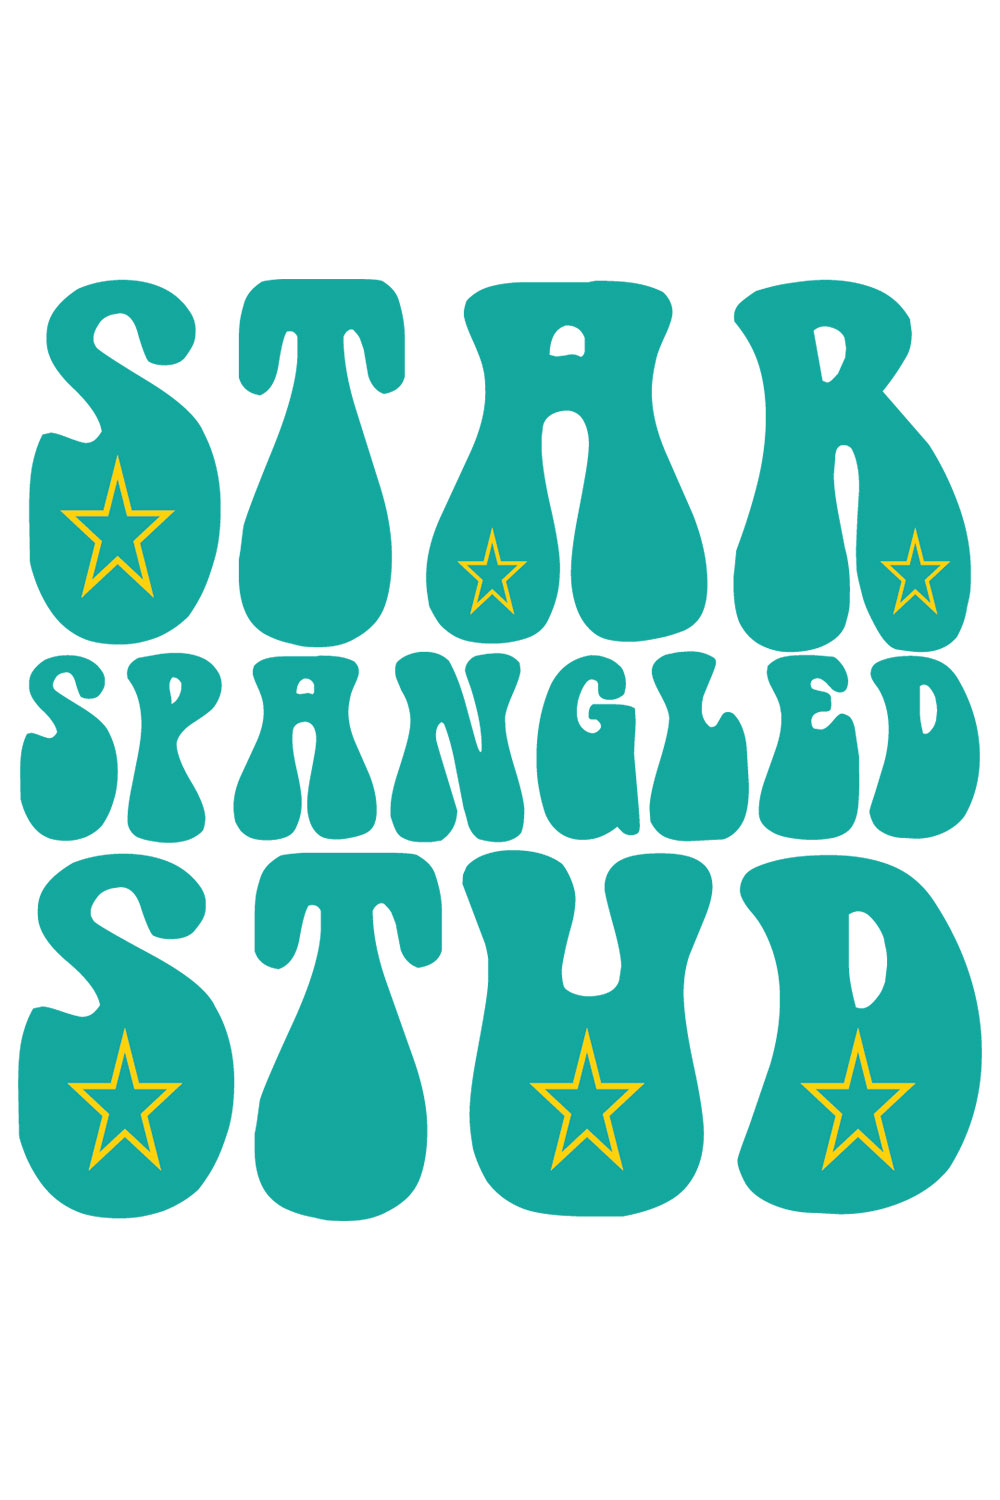 Star Spangled Stud pinterest preview image.